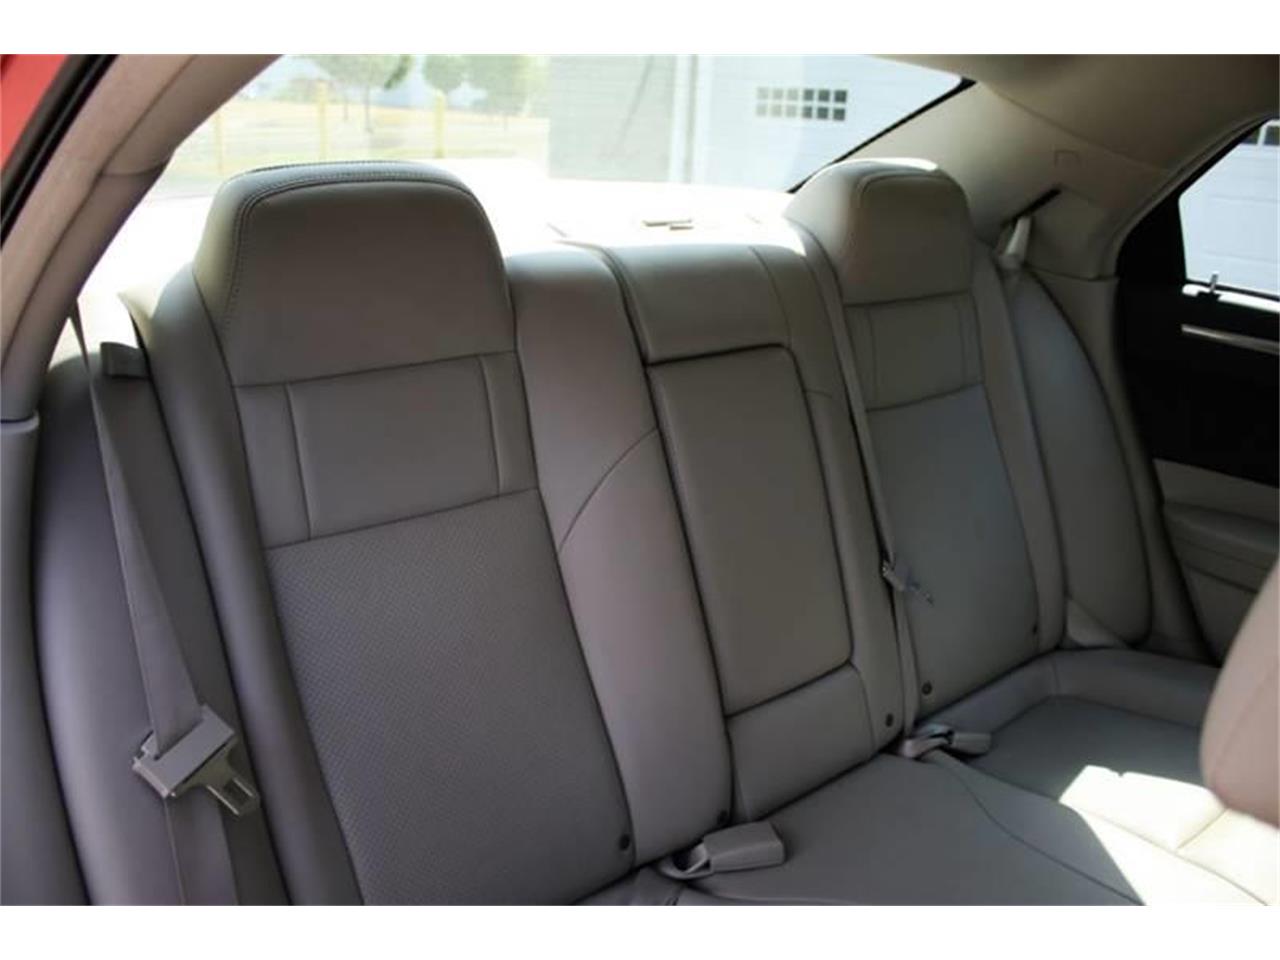 2006 Chrysler 300 for sale in Hilton, NY – photo 48